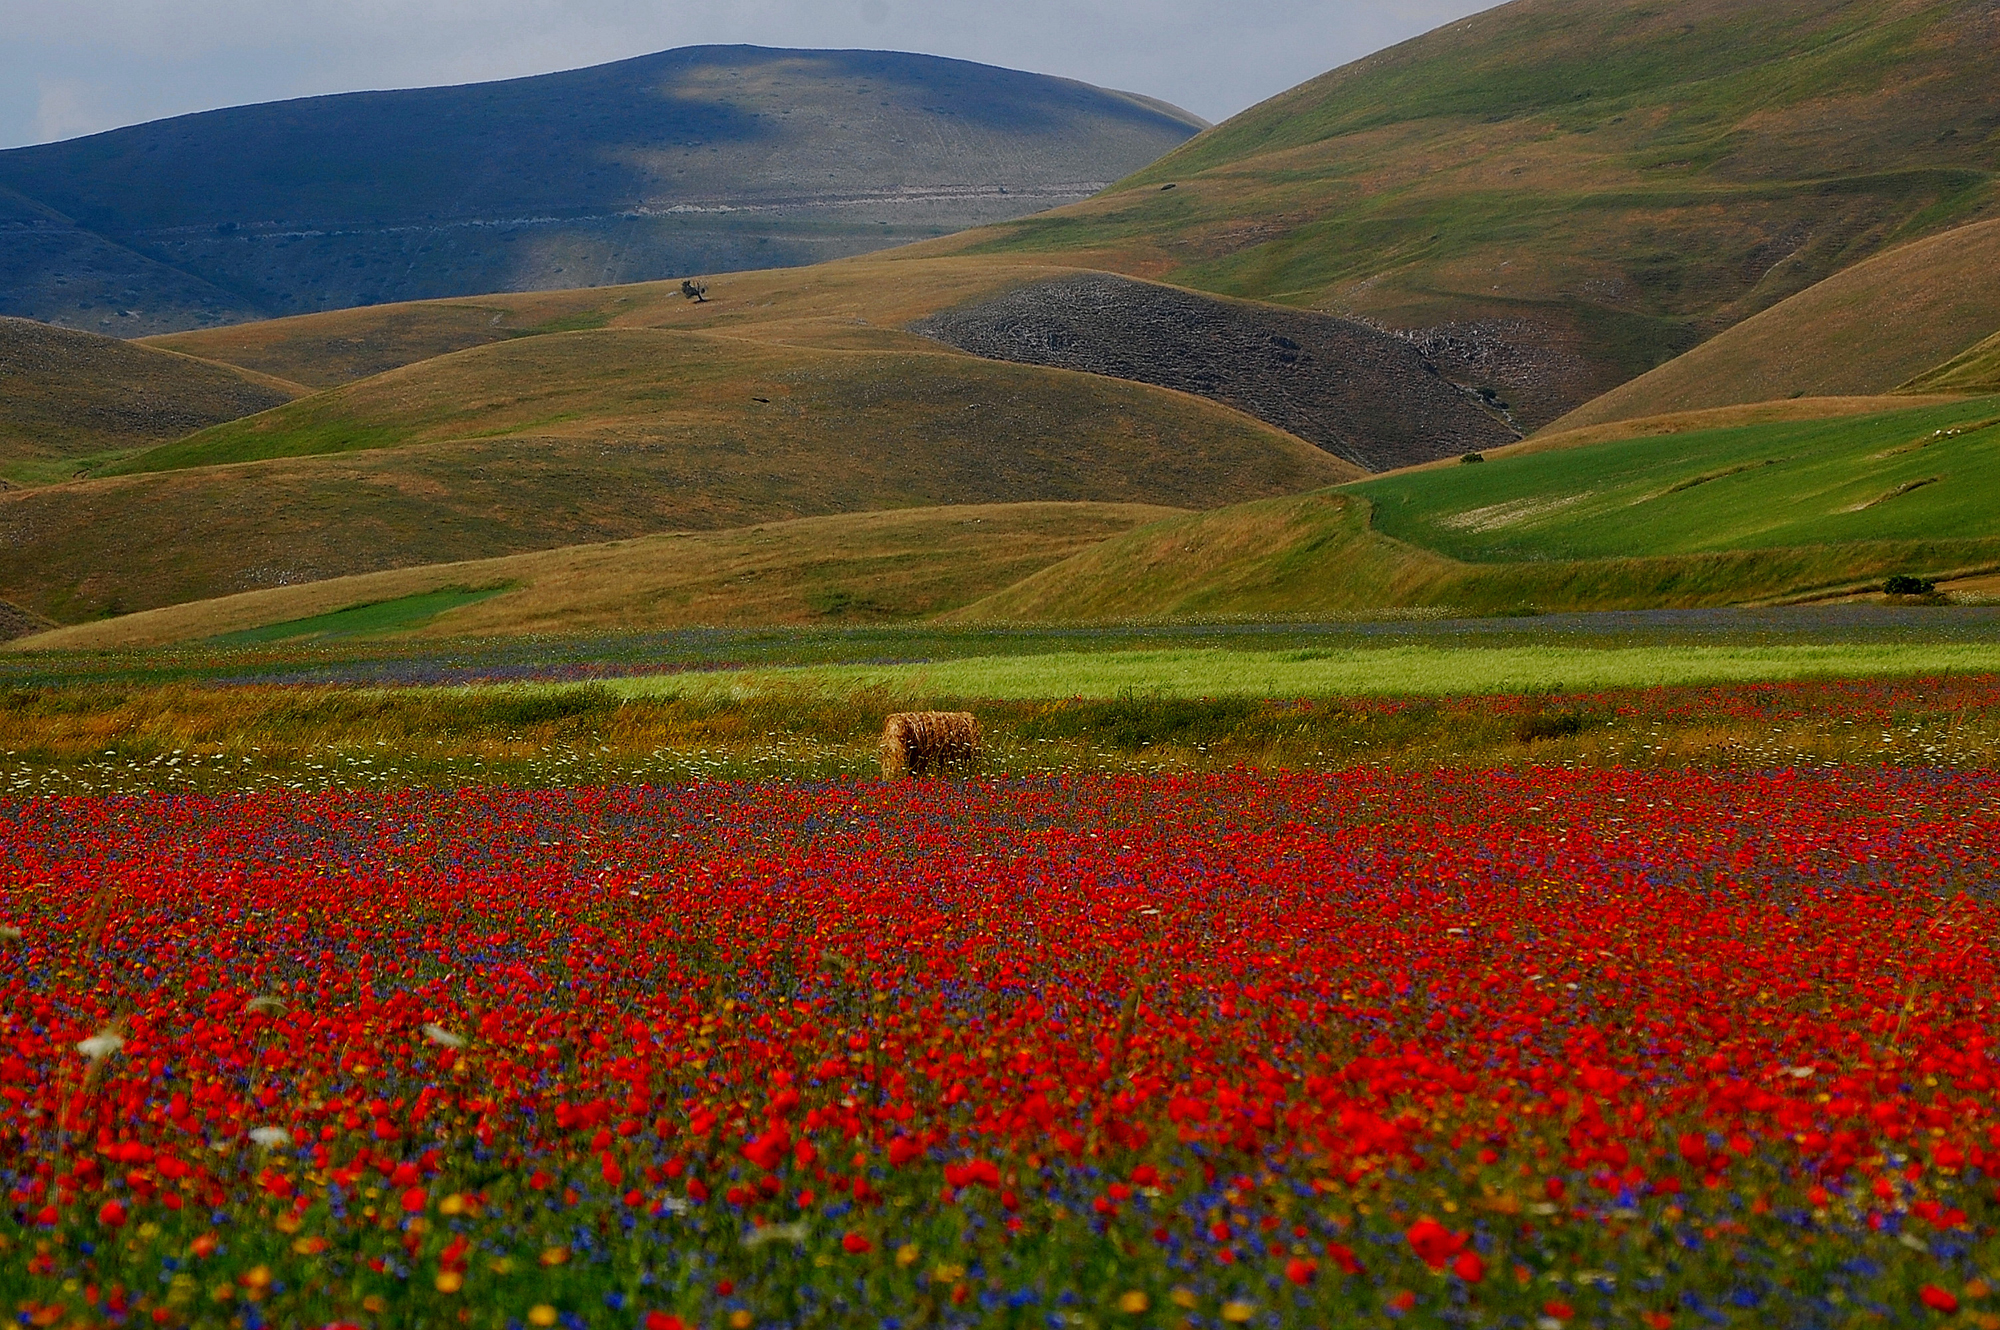 A thousand red poppies...